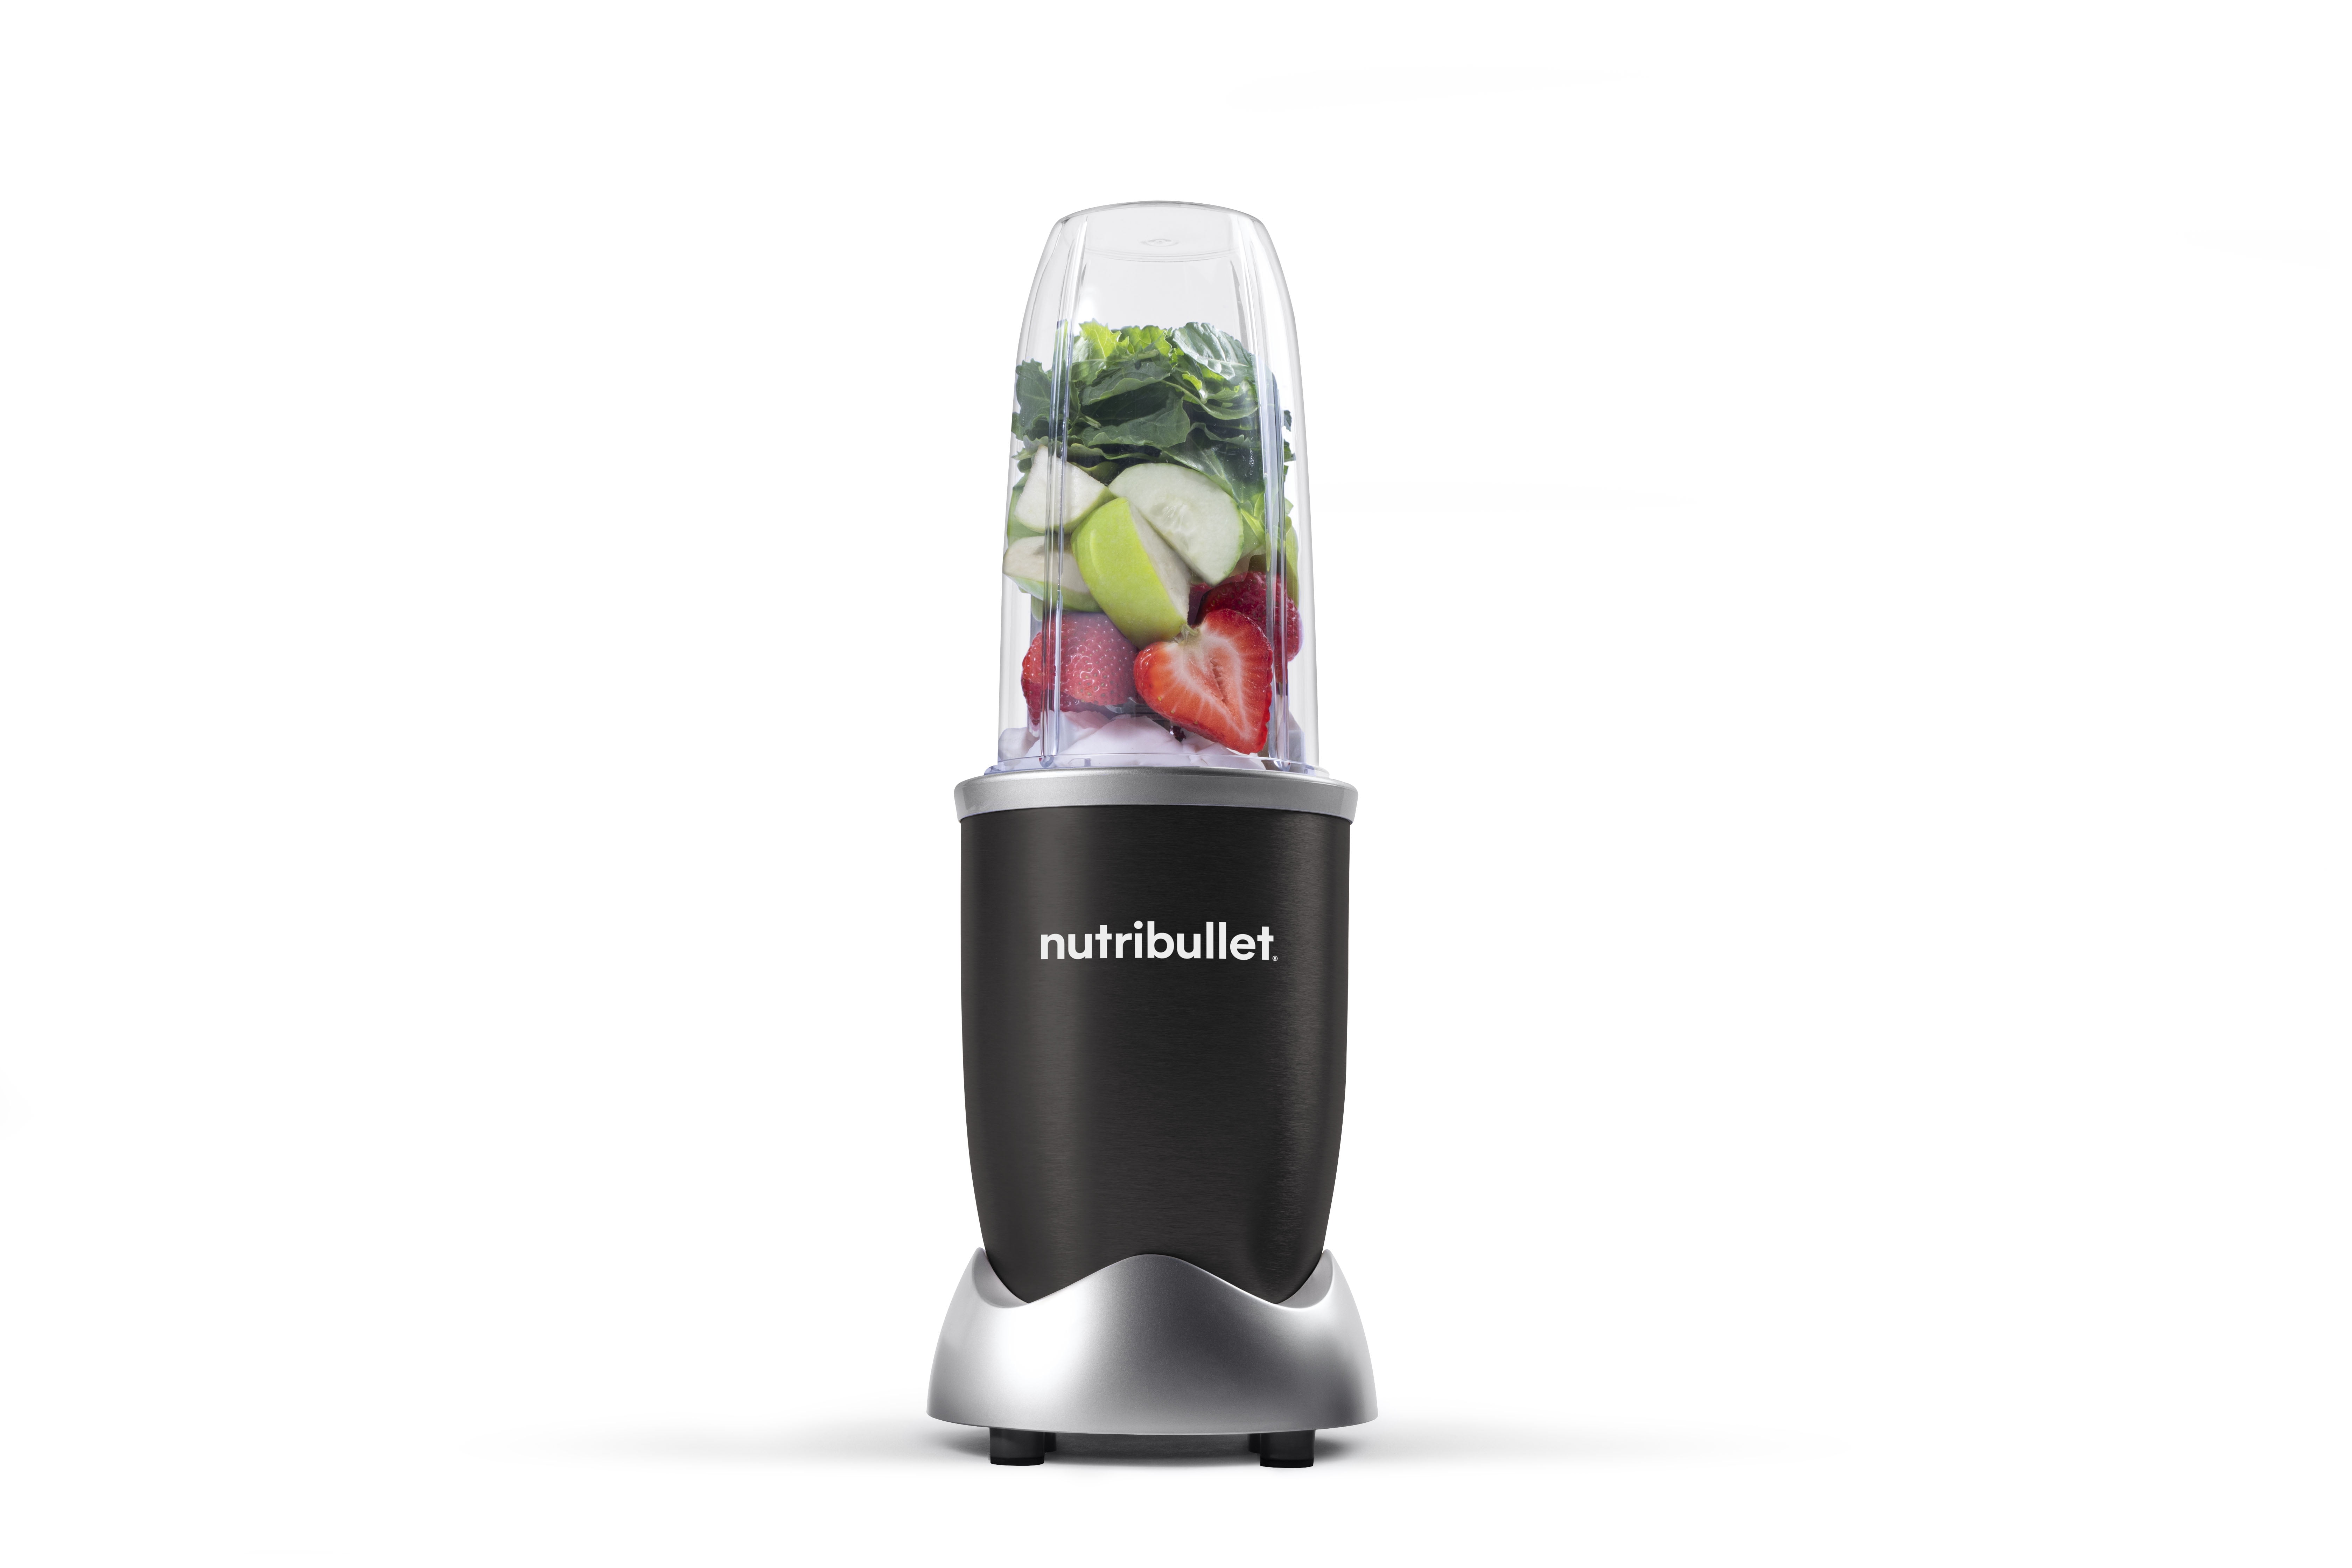 In a hurry? Let's make it simple with Nutribullet Go. It's portable, easy  to clean, and makes the best morning smoothies. Shop for yours now at the  link in our bio! #nutribullet #